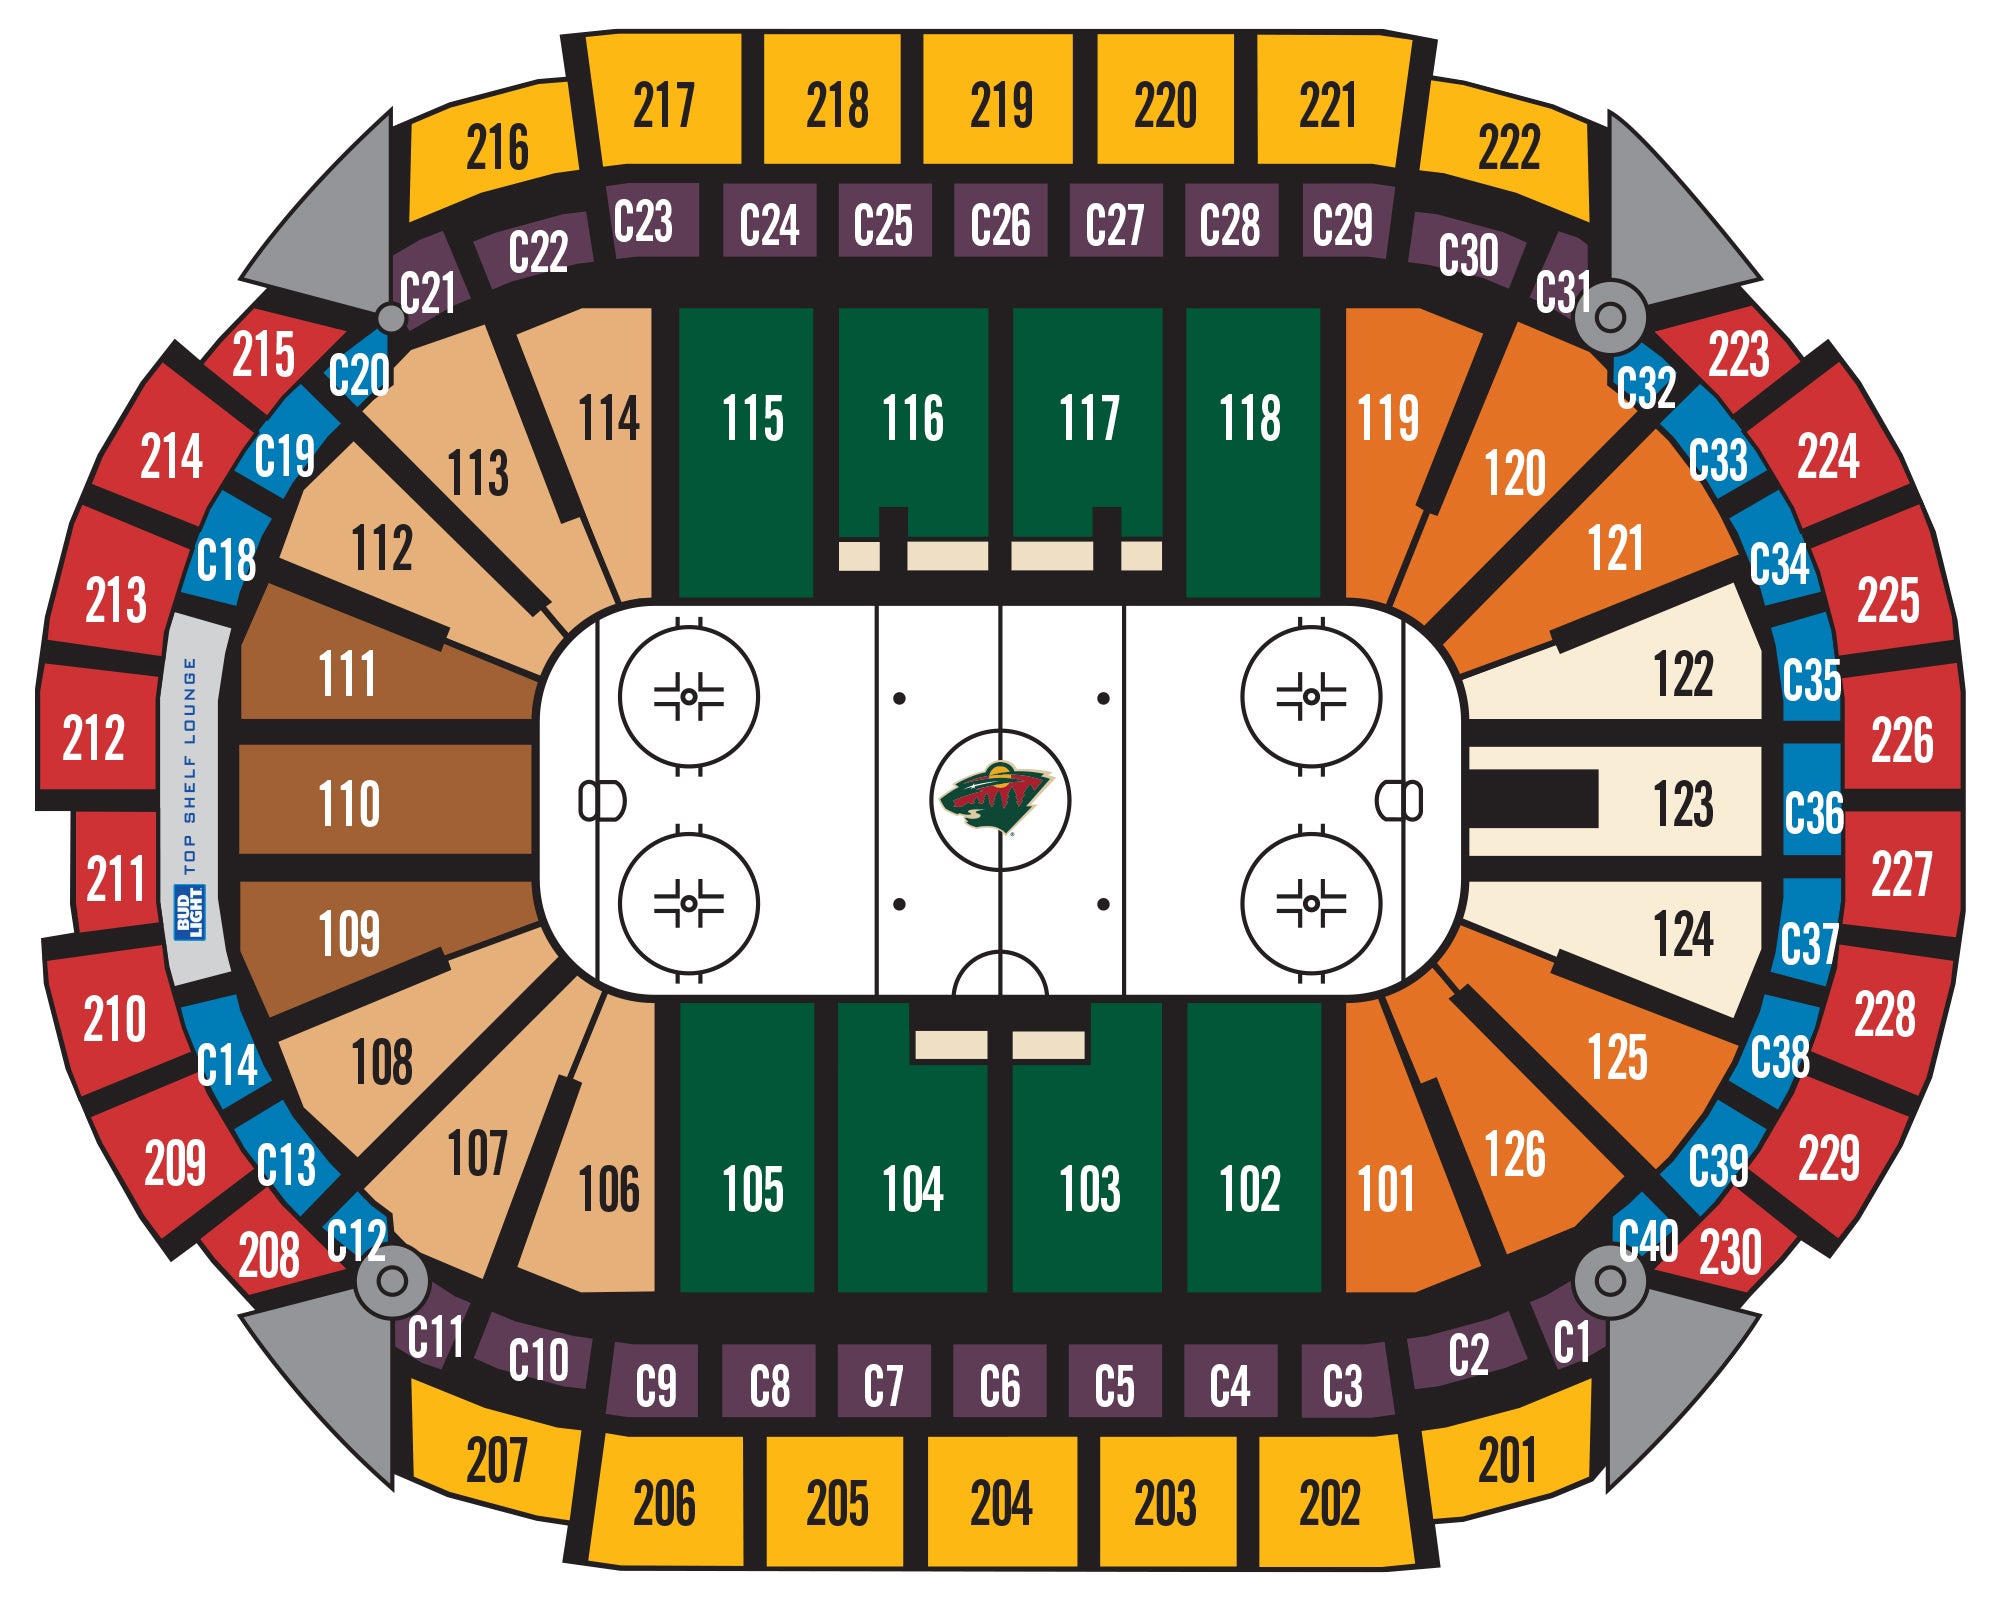 Xl Center Seating Chart With Seat Numbers Elcho Table